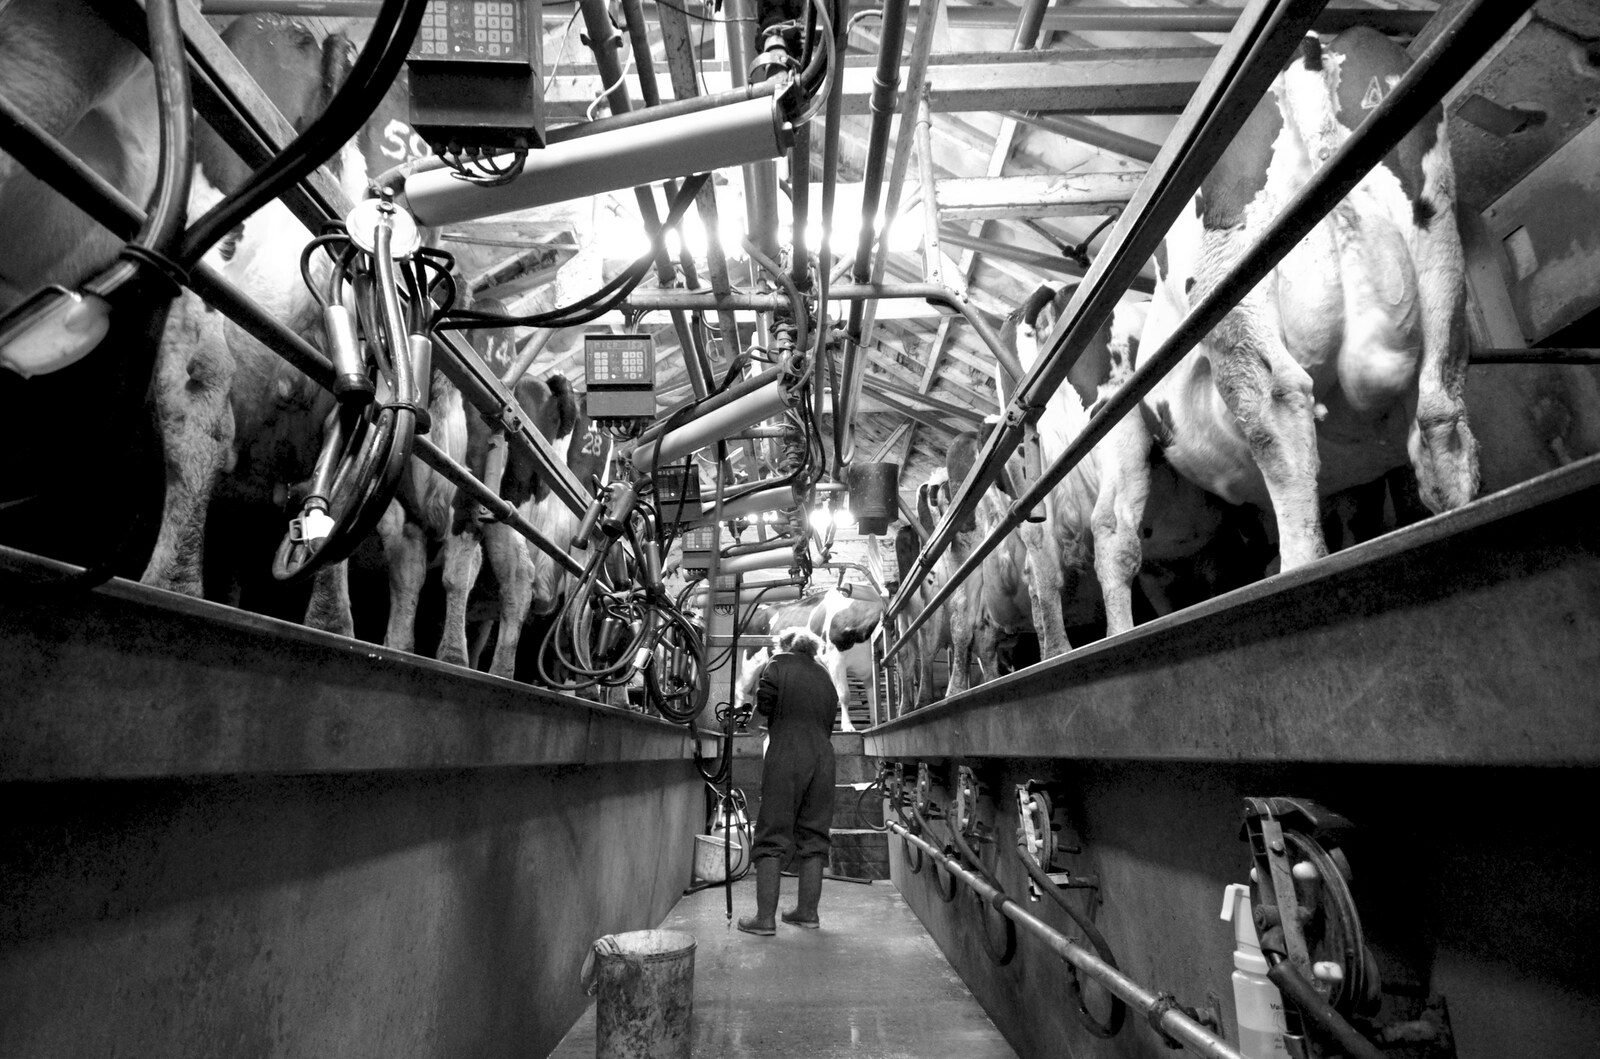 Wavy is surrounded by a load of udders from The Last Milking at Dairy Farm, Thrandeston, Suffolk - 11th January 2007